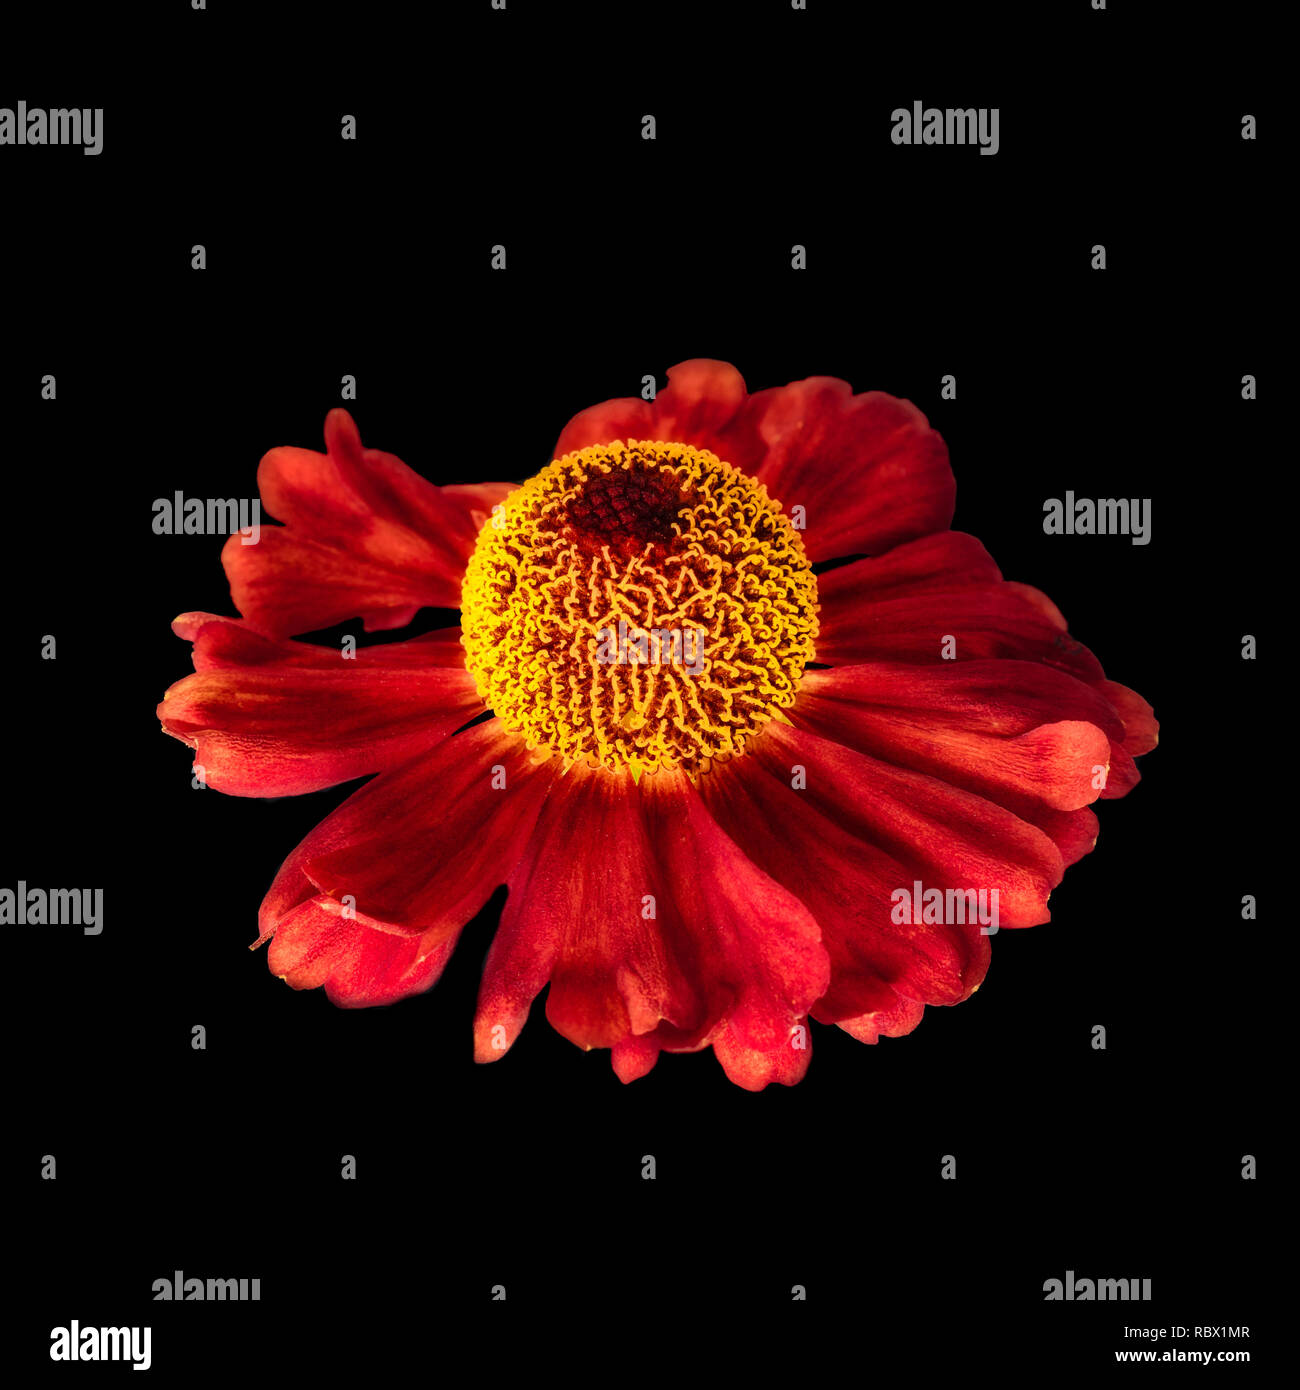 Still life fine art floral colorful macro of a single isolated wide open yellow red helenium / bride of the sun blossom in fantastic realism/surreal Stock Photo